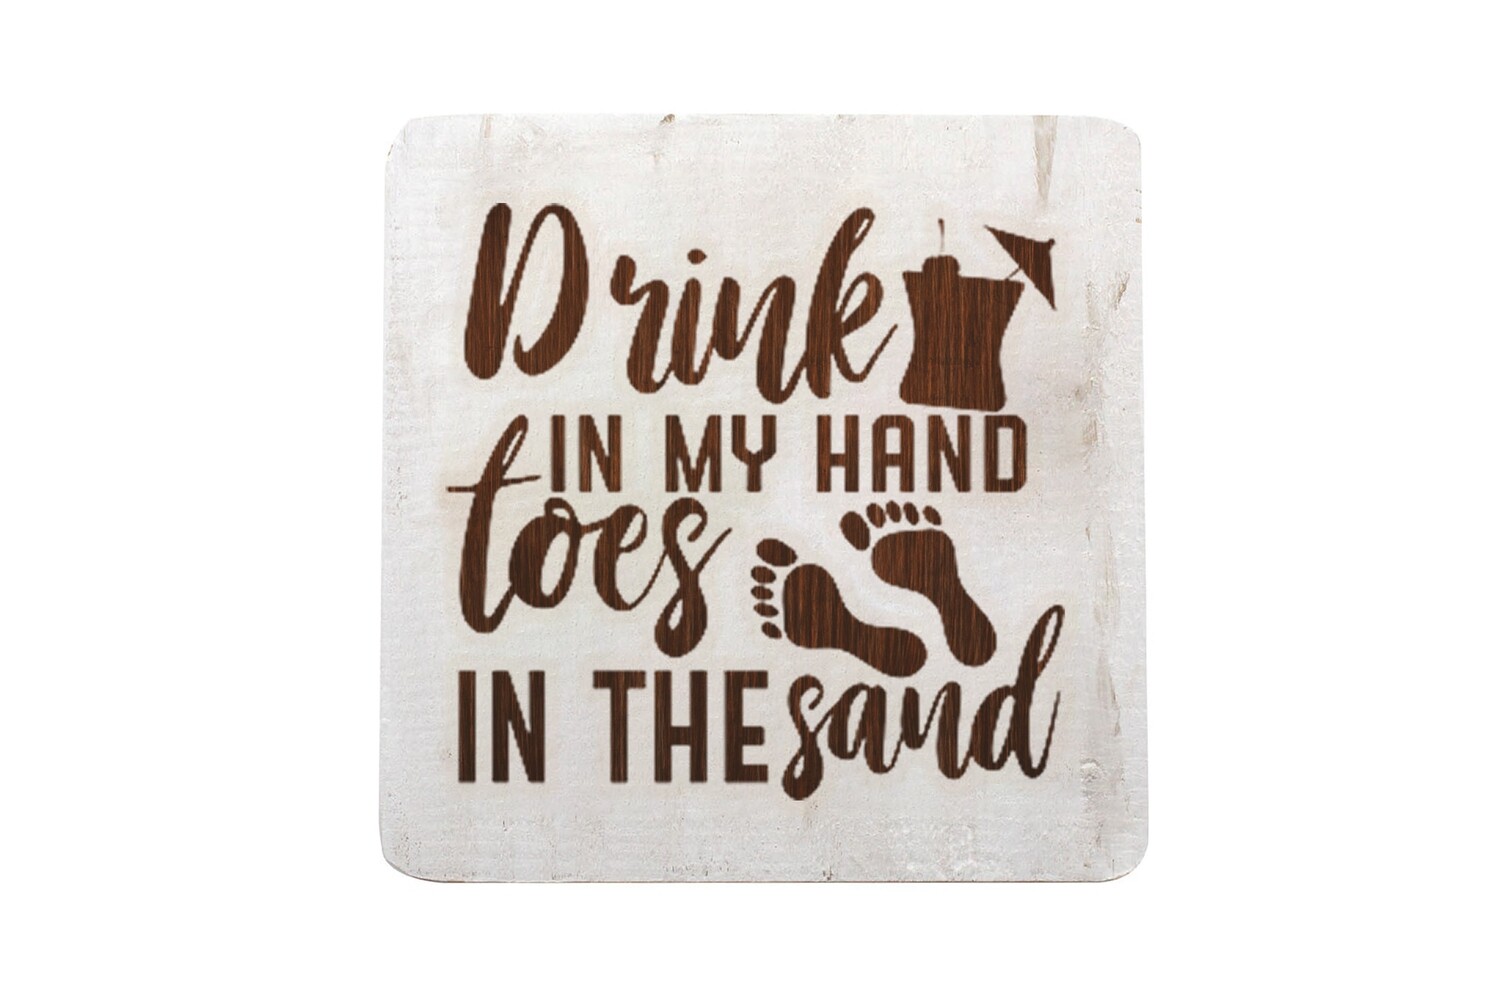 "Drink in my Hand toes in the Sand" Hand-Painted Wood Coaster Set